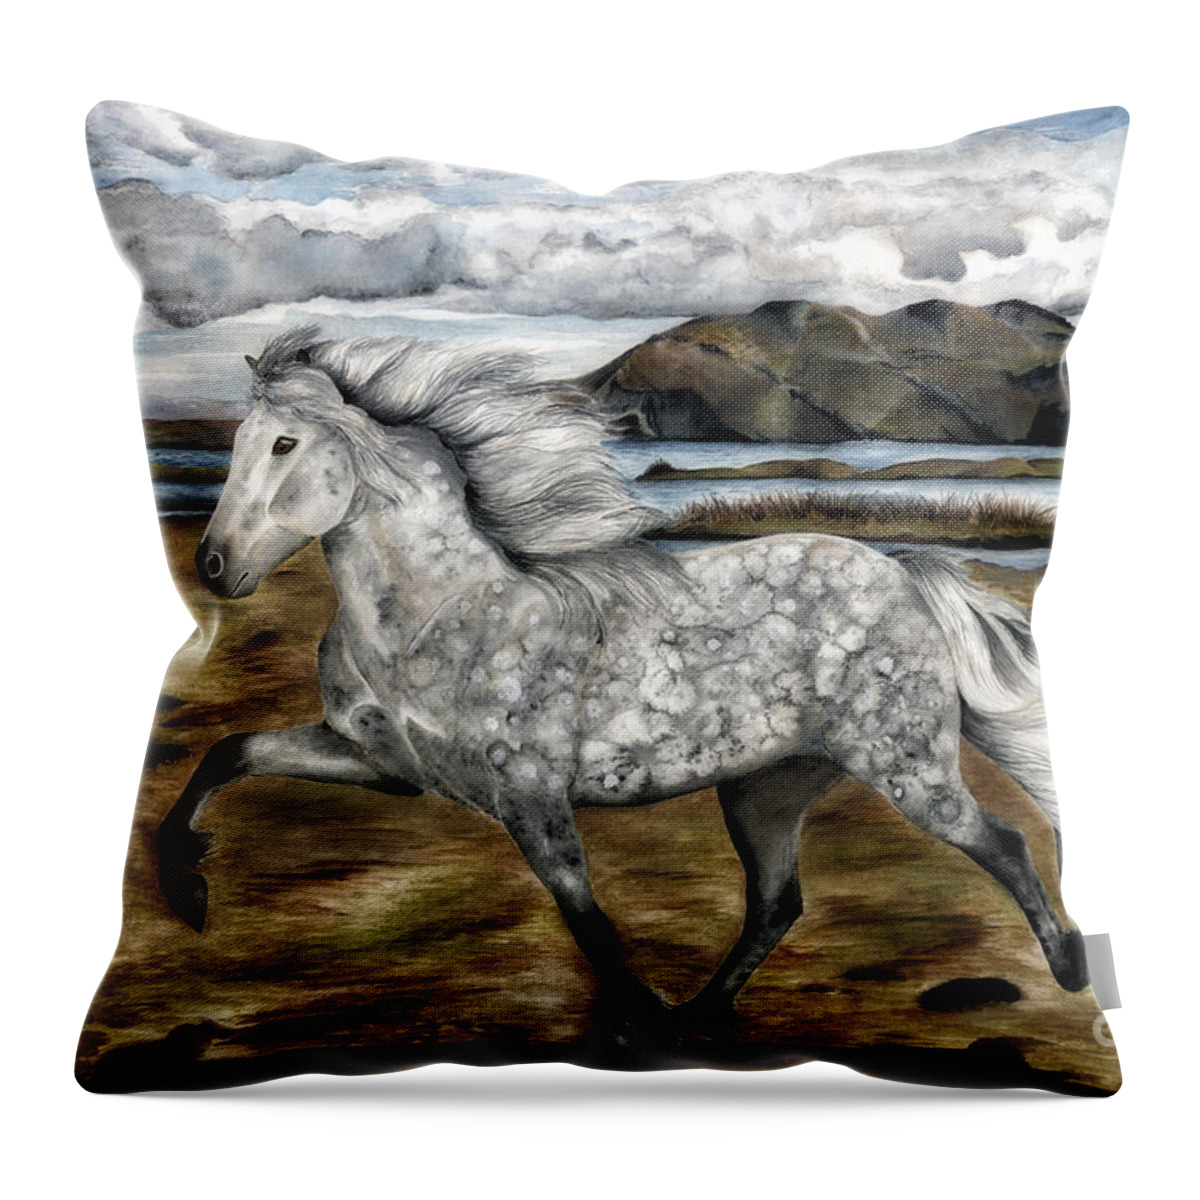 Icelandic Horse Throw Pillow featuring the painting Charismatic Icelandic Horse by Shari Nees